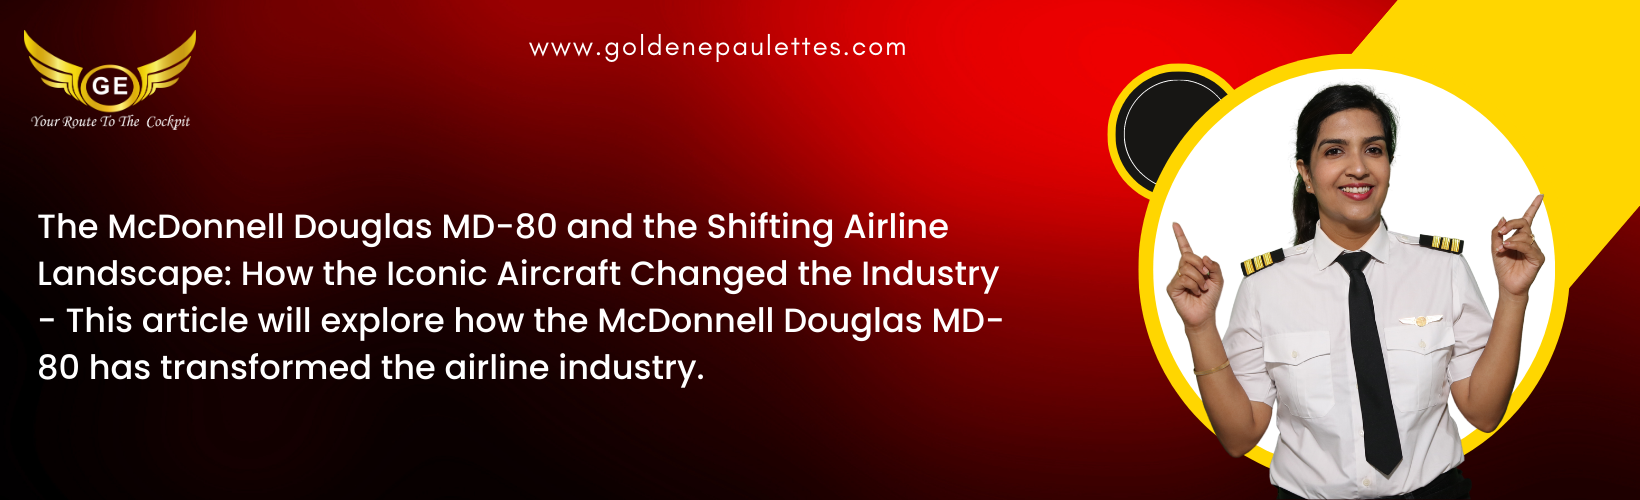 The McDonnell Douglas MD